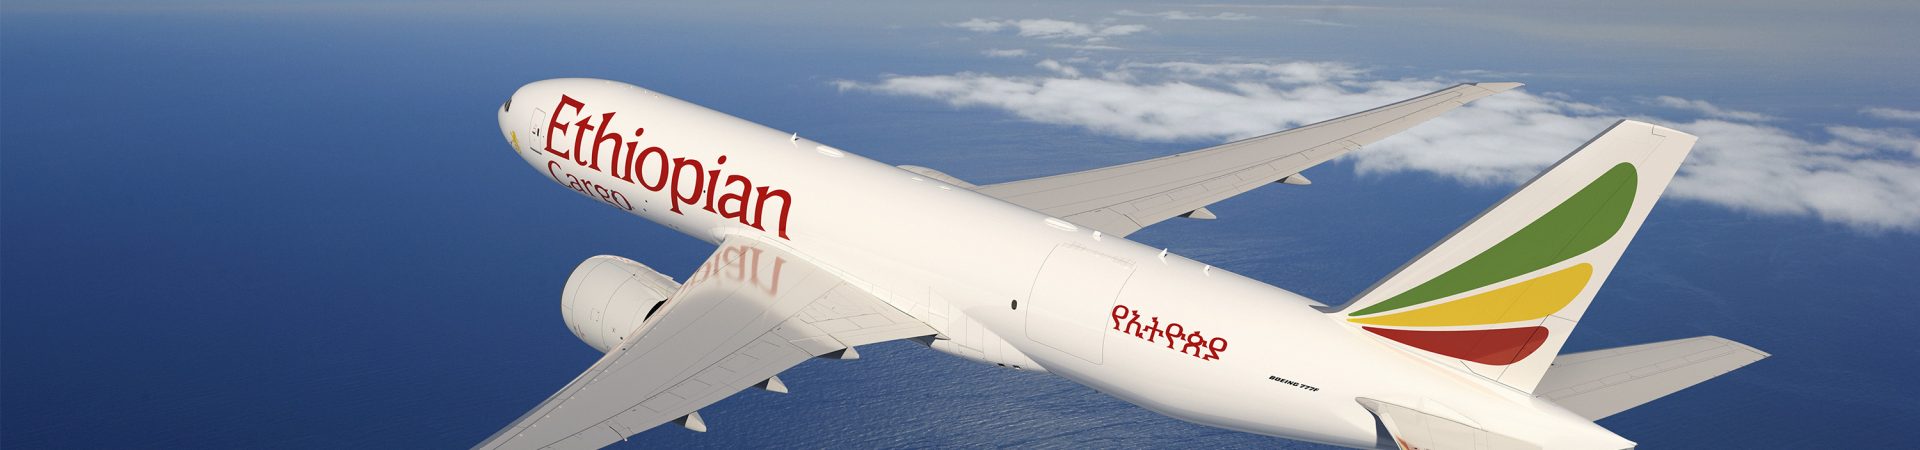 Ethiopian airlines uses blockchain for loyalty rewards